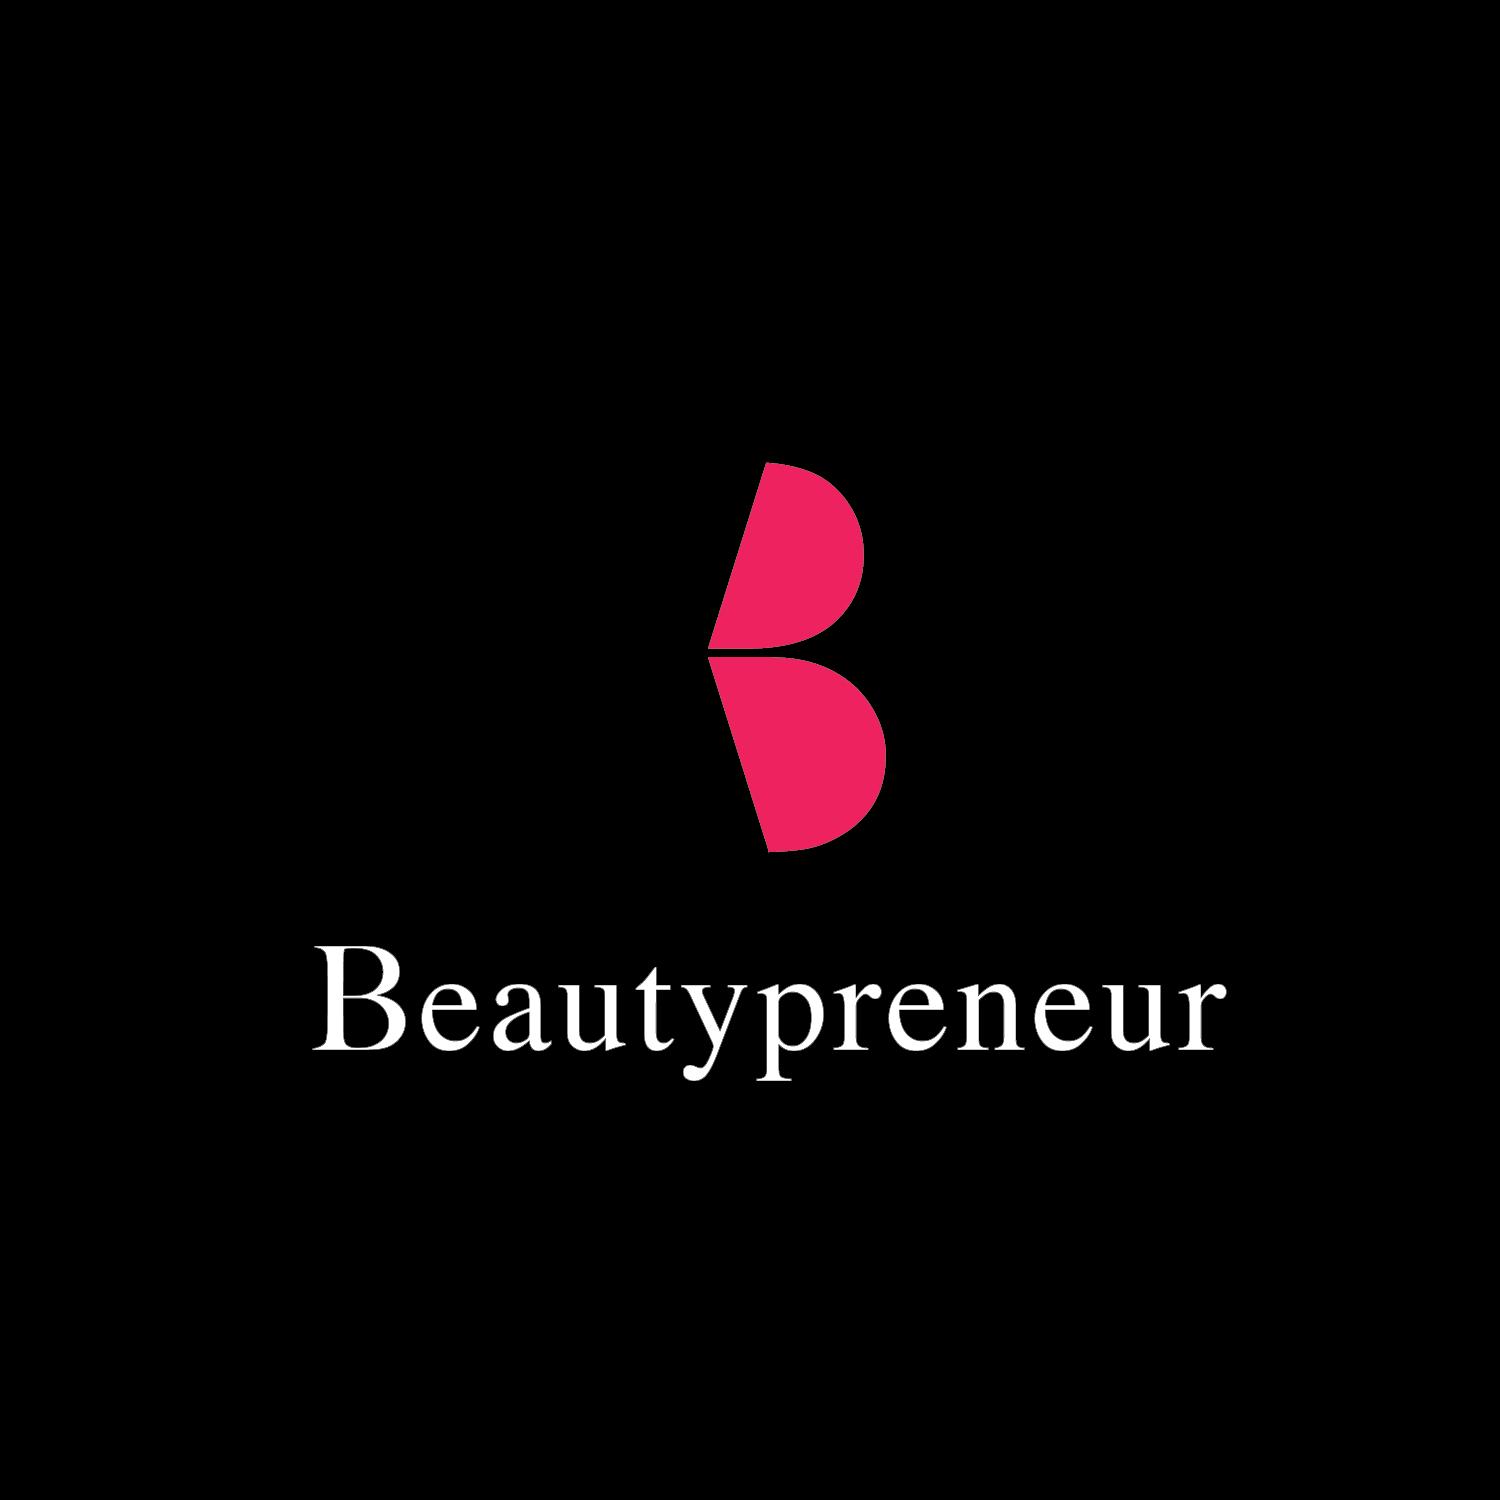 creative minimalist logo design of a B for the company name Beautypreneur as a pair of profile lips